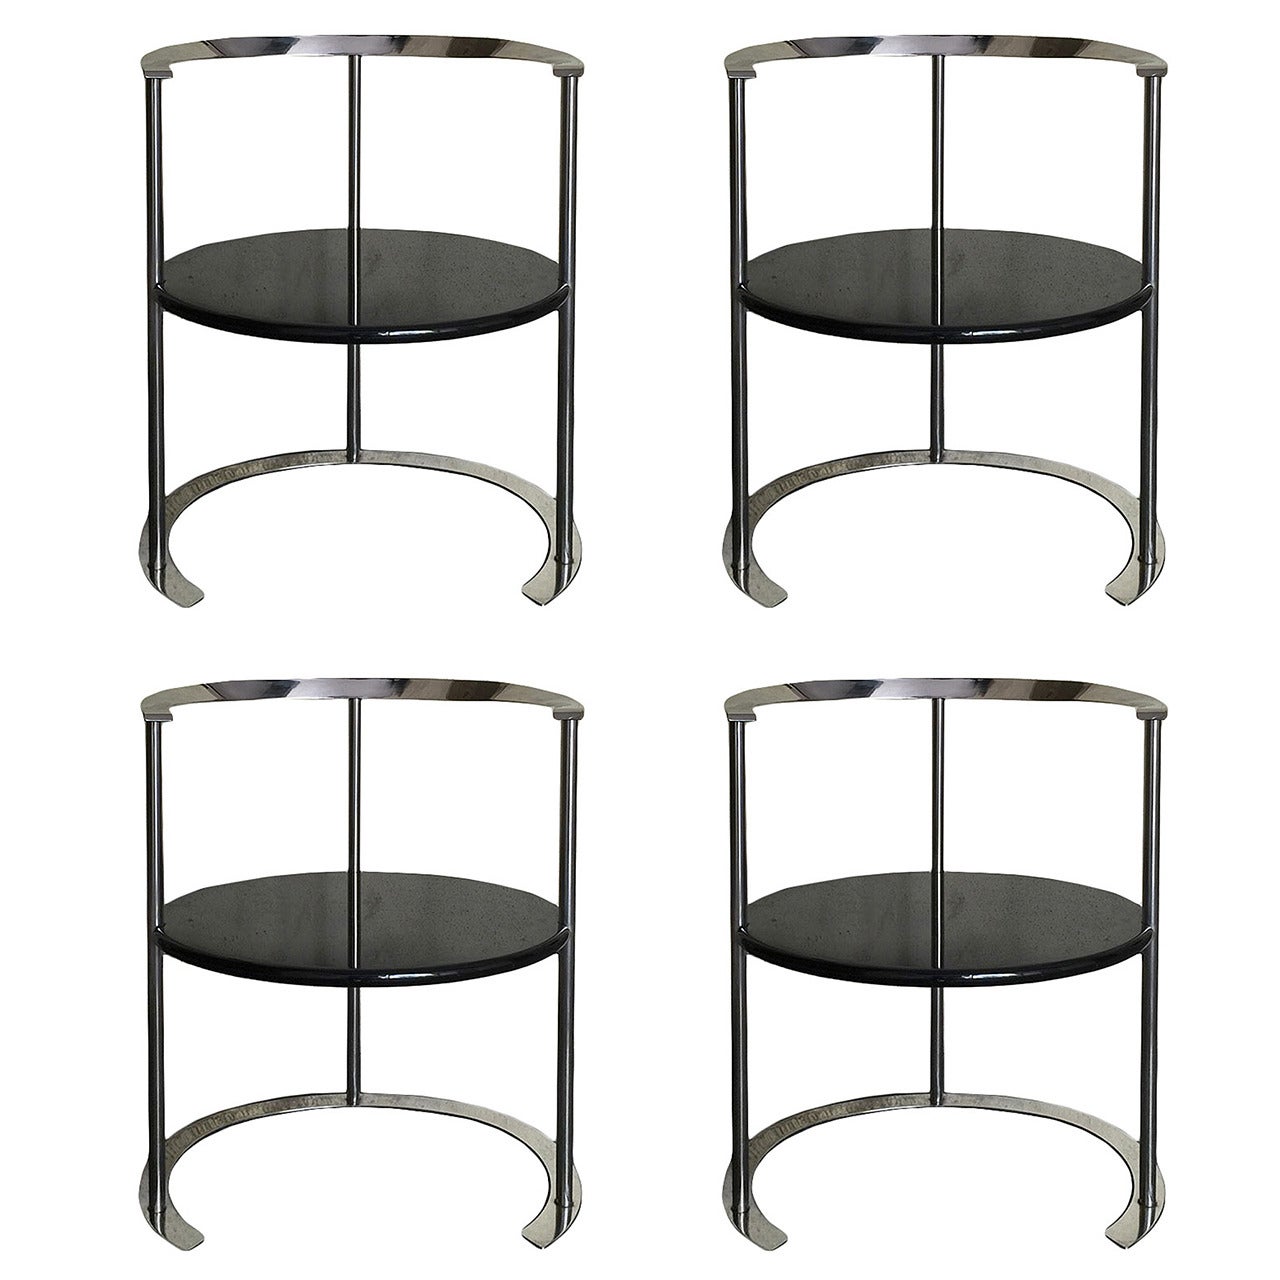 Set of Four Chairs Designed by Caccia Dominioni, 1958